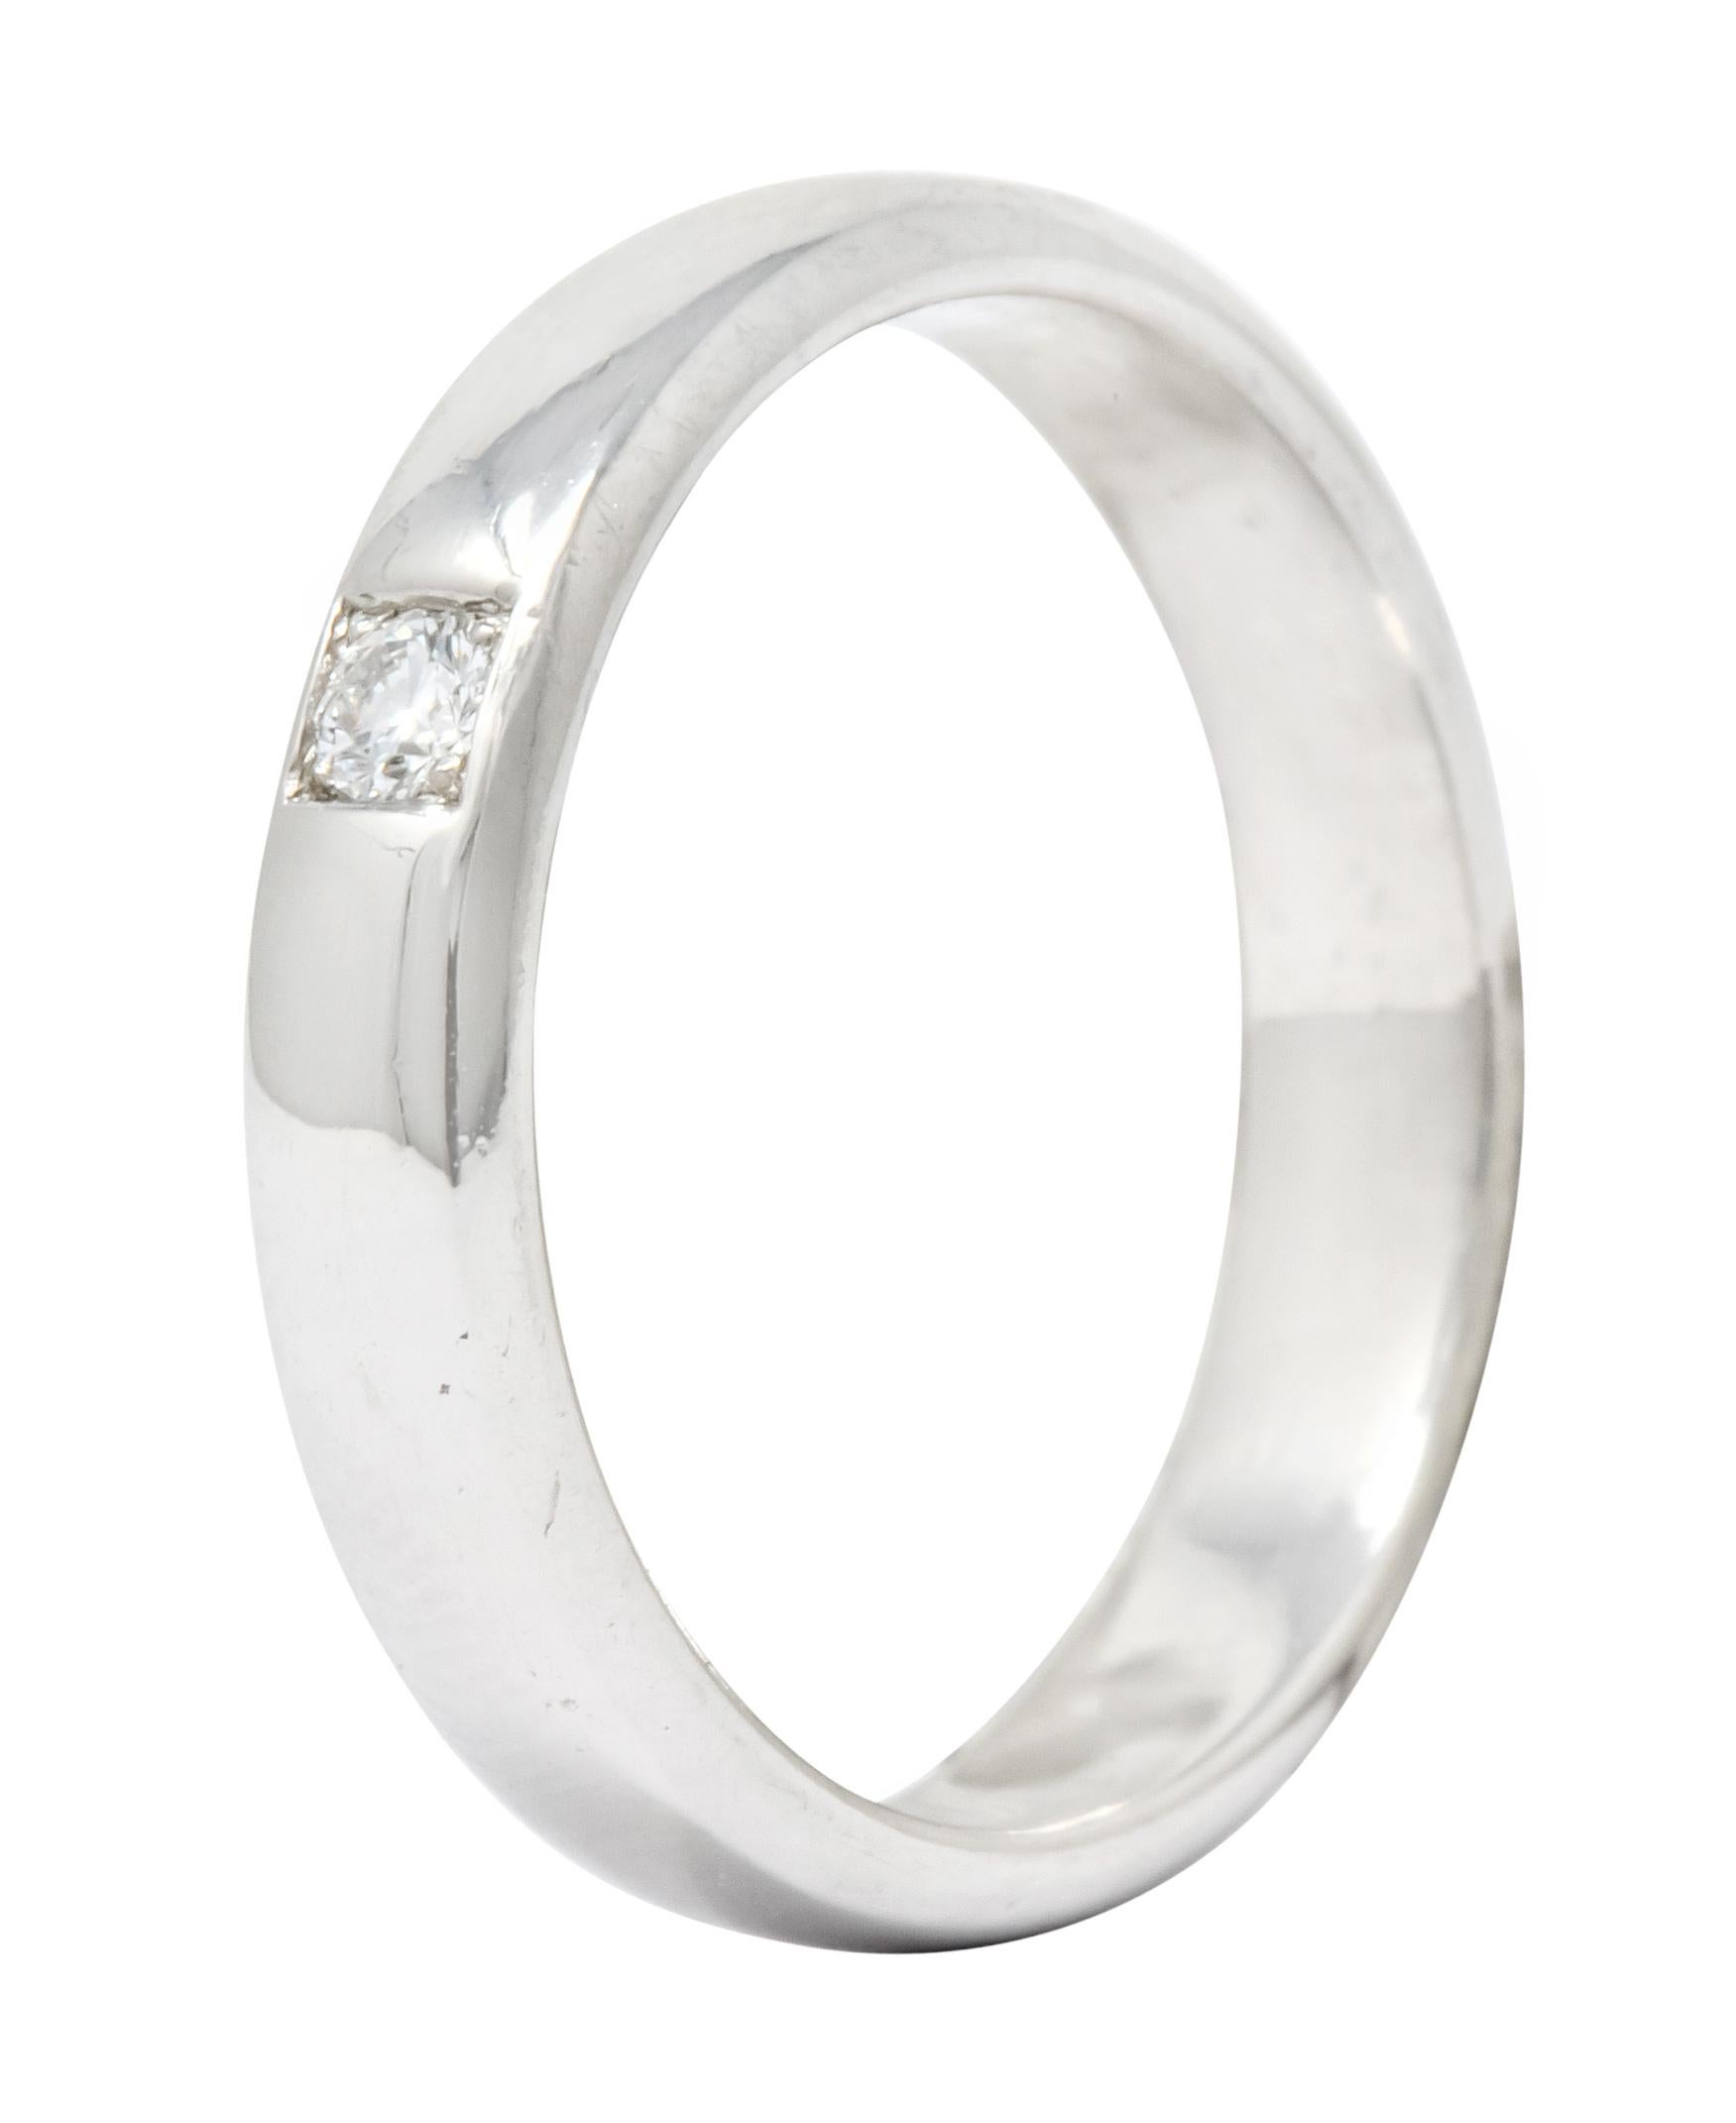 Band style ring centering a square recess bead set with a round brilliant cut diamond weighing approximately 0.07 carat; eye-clean and white

Completed by a high polish

Tested as 18 karat gold

Circa: 1990s

Ring Size: 7 1/2 & sizable

Measures: